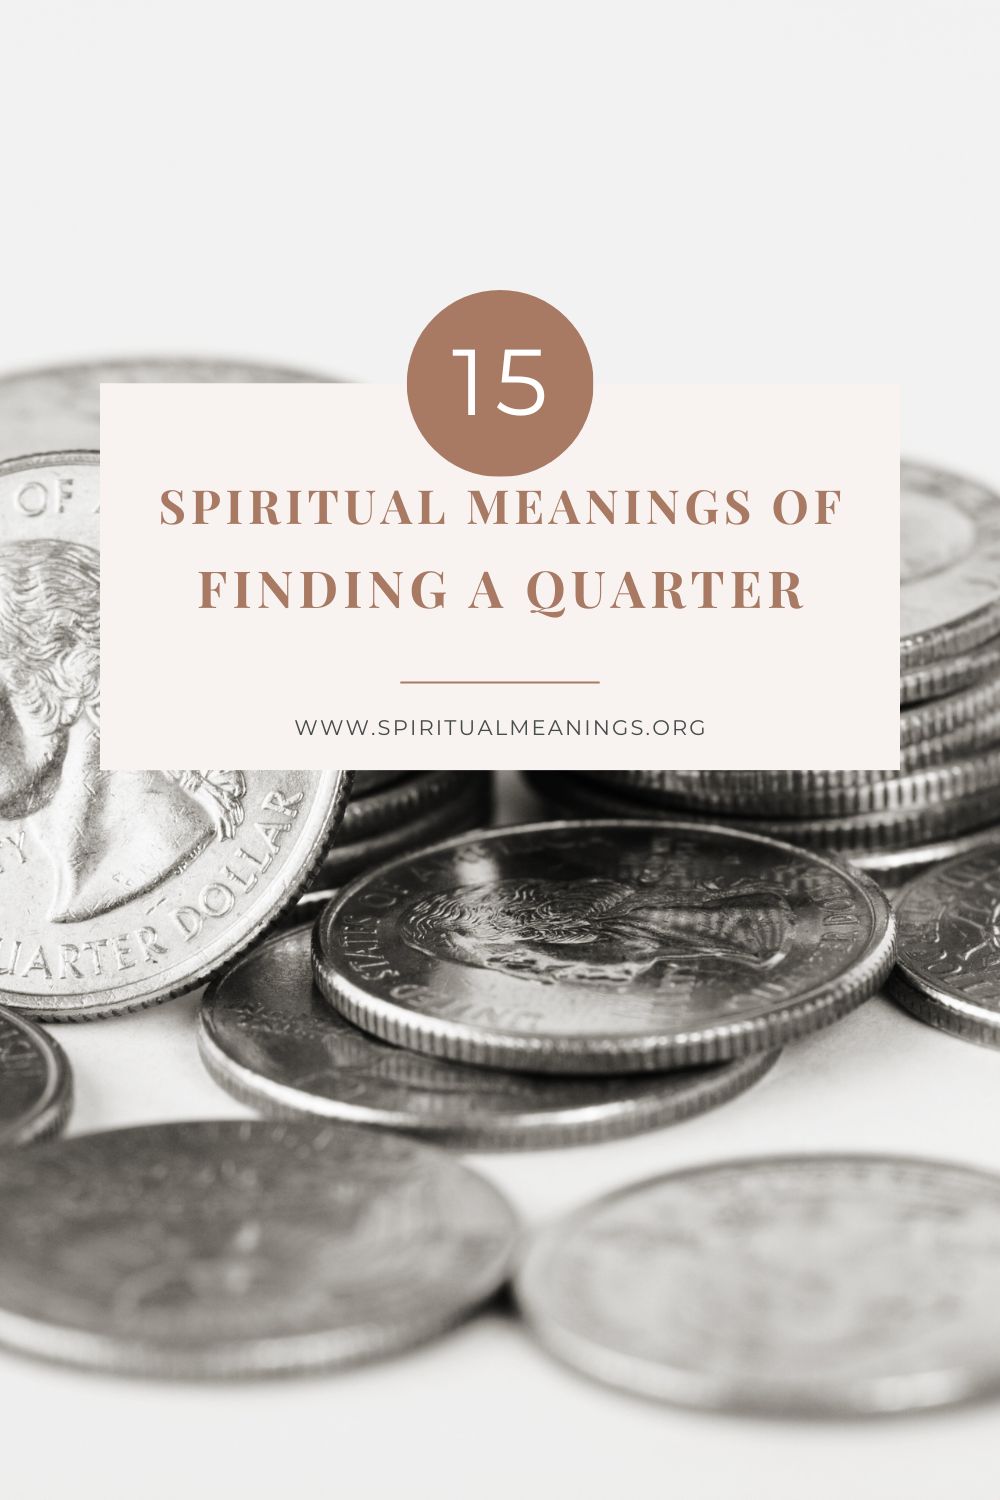 15 Spiritual Meanings of Finding a Quarter